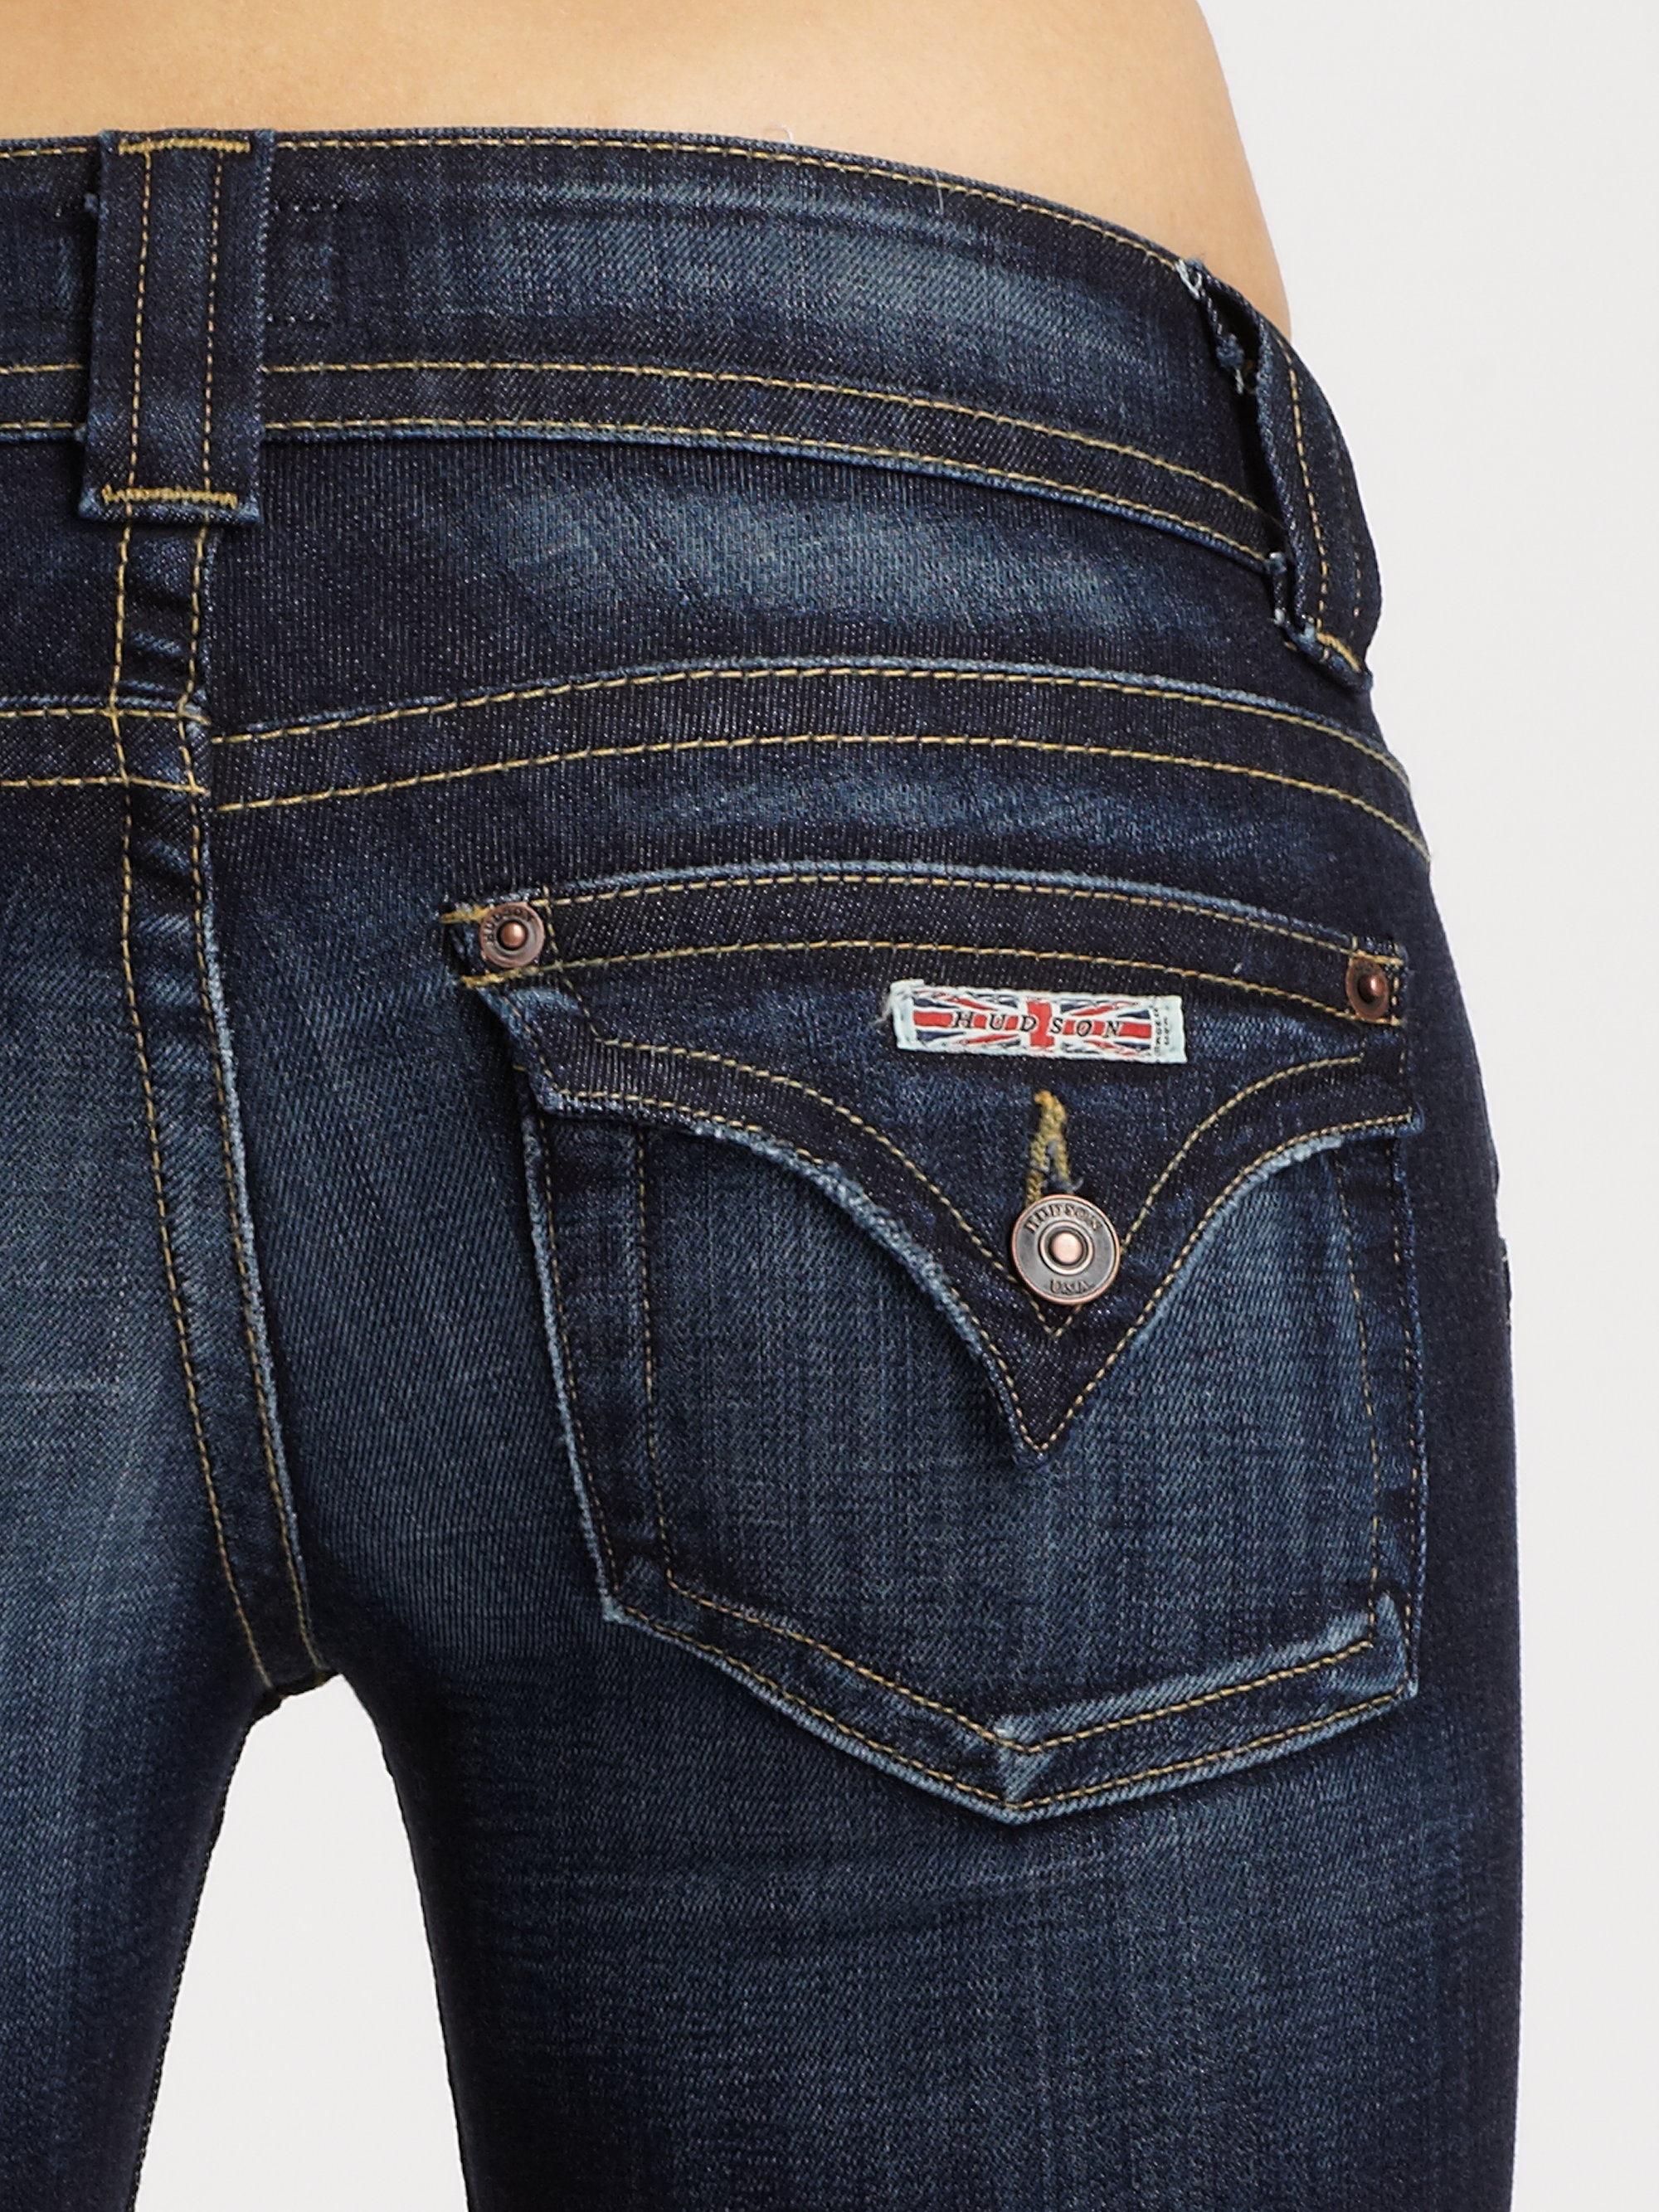 Hudson Signature Mid Rise Bootcut Jeans | vlr.eng.br